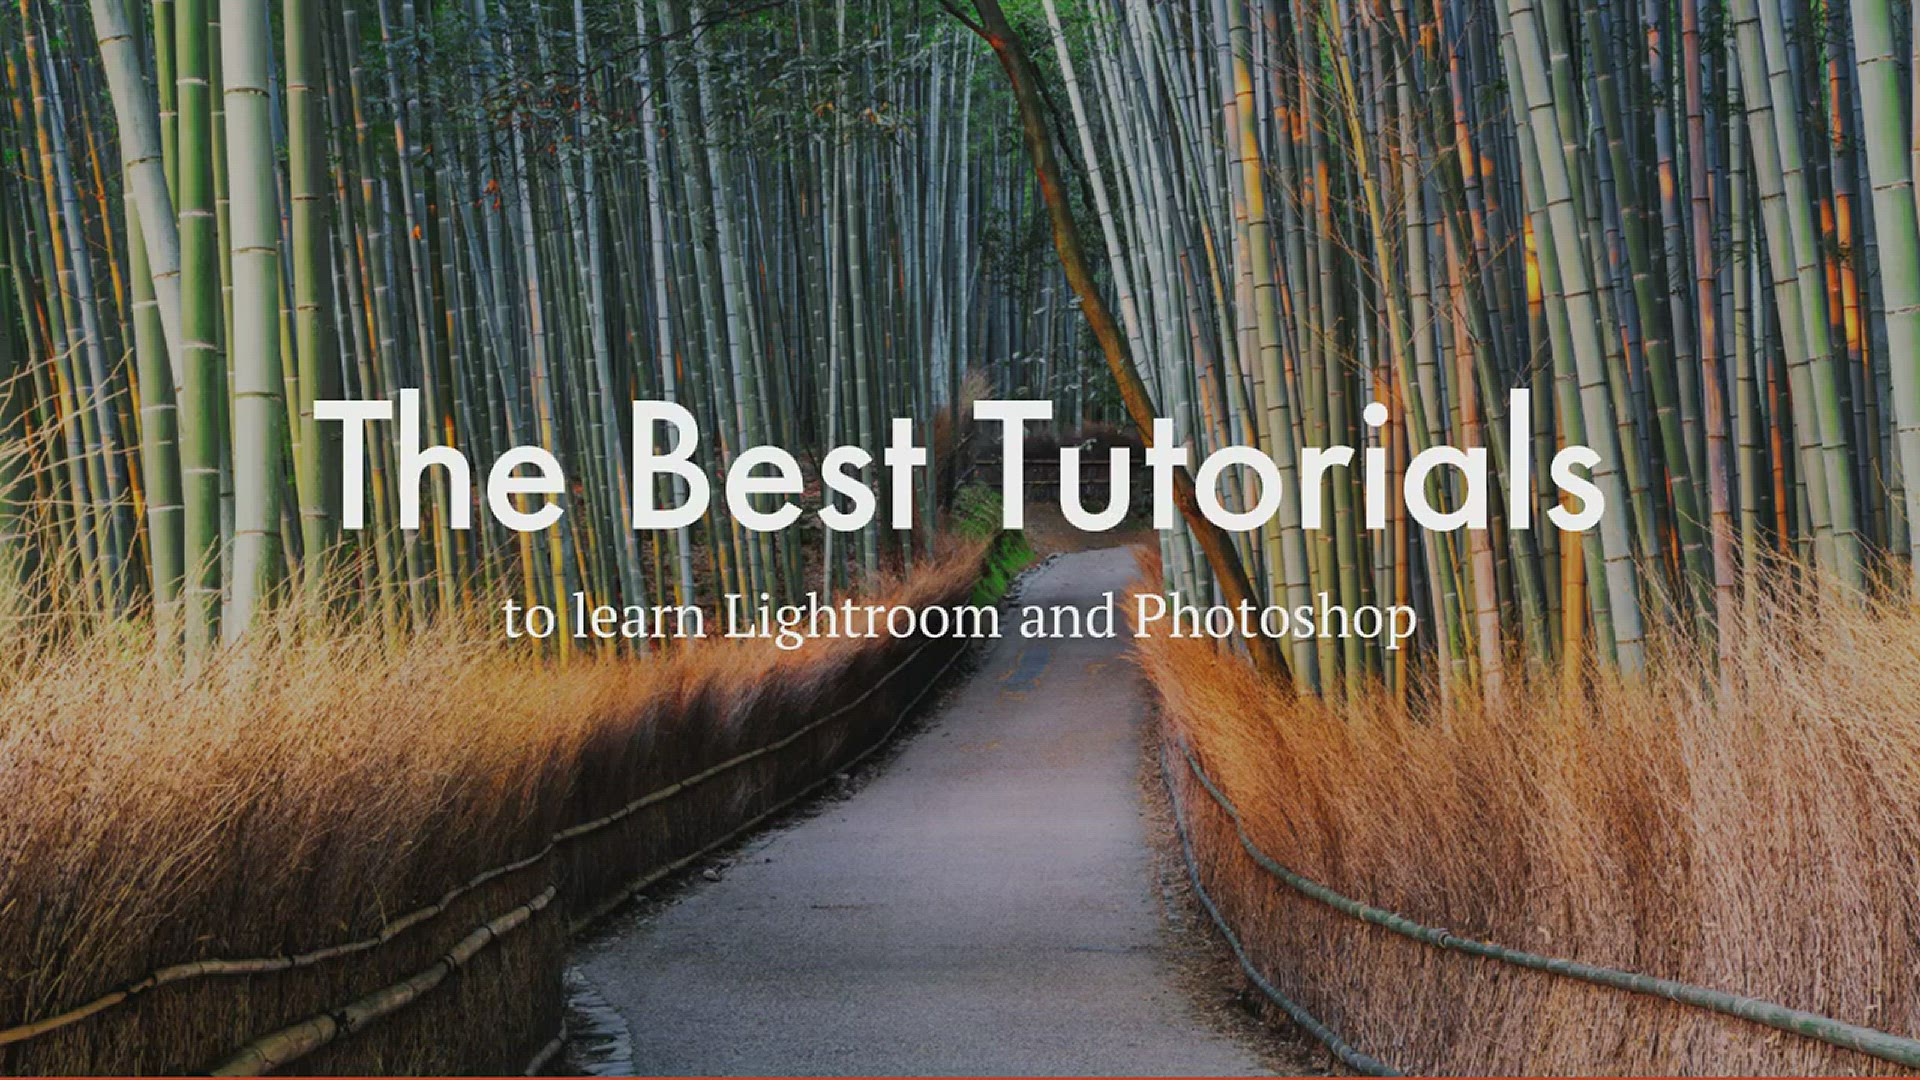 'Video thumbnail for The Best Tutorials for Lightroom and Photoshop'